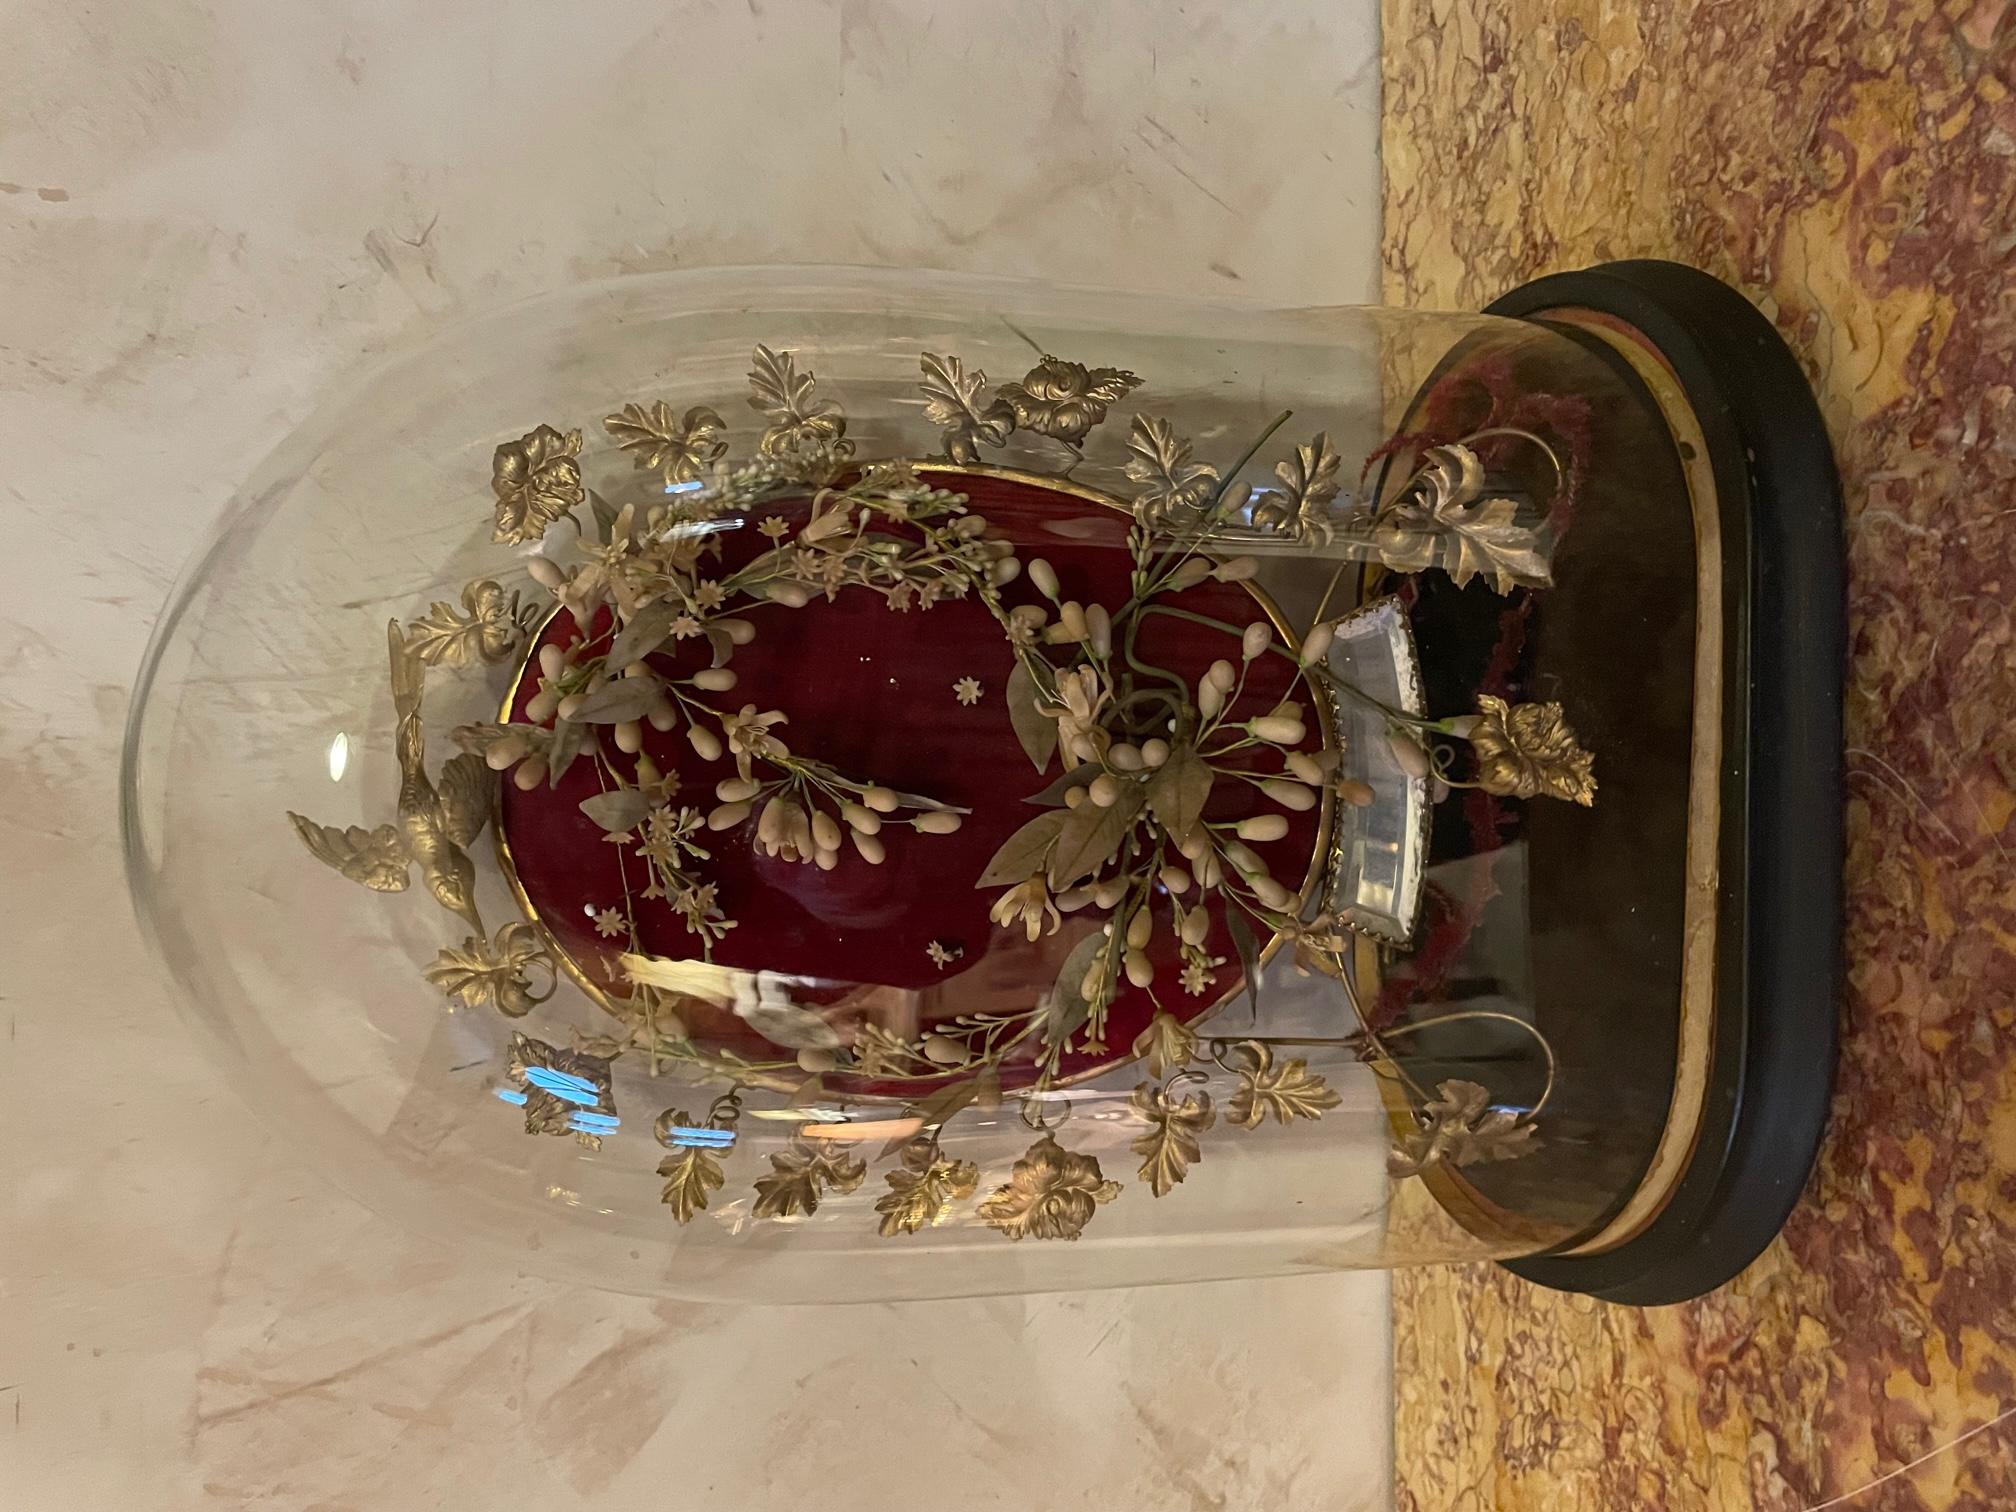 Beautiful 19th century French Napoleon III wedding glass globe from the 1870s.
Inside we can see a very nice brass ornament with bird and flowers representing love, we use to offer globe like this for new couple during their marriage. It was